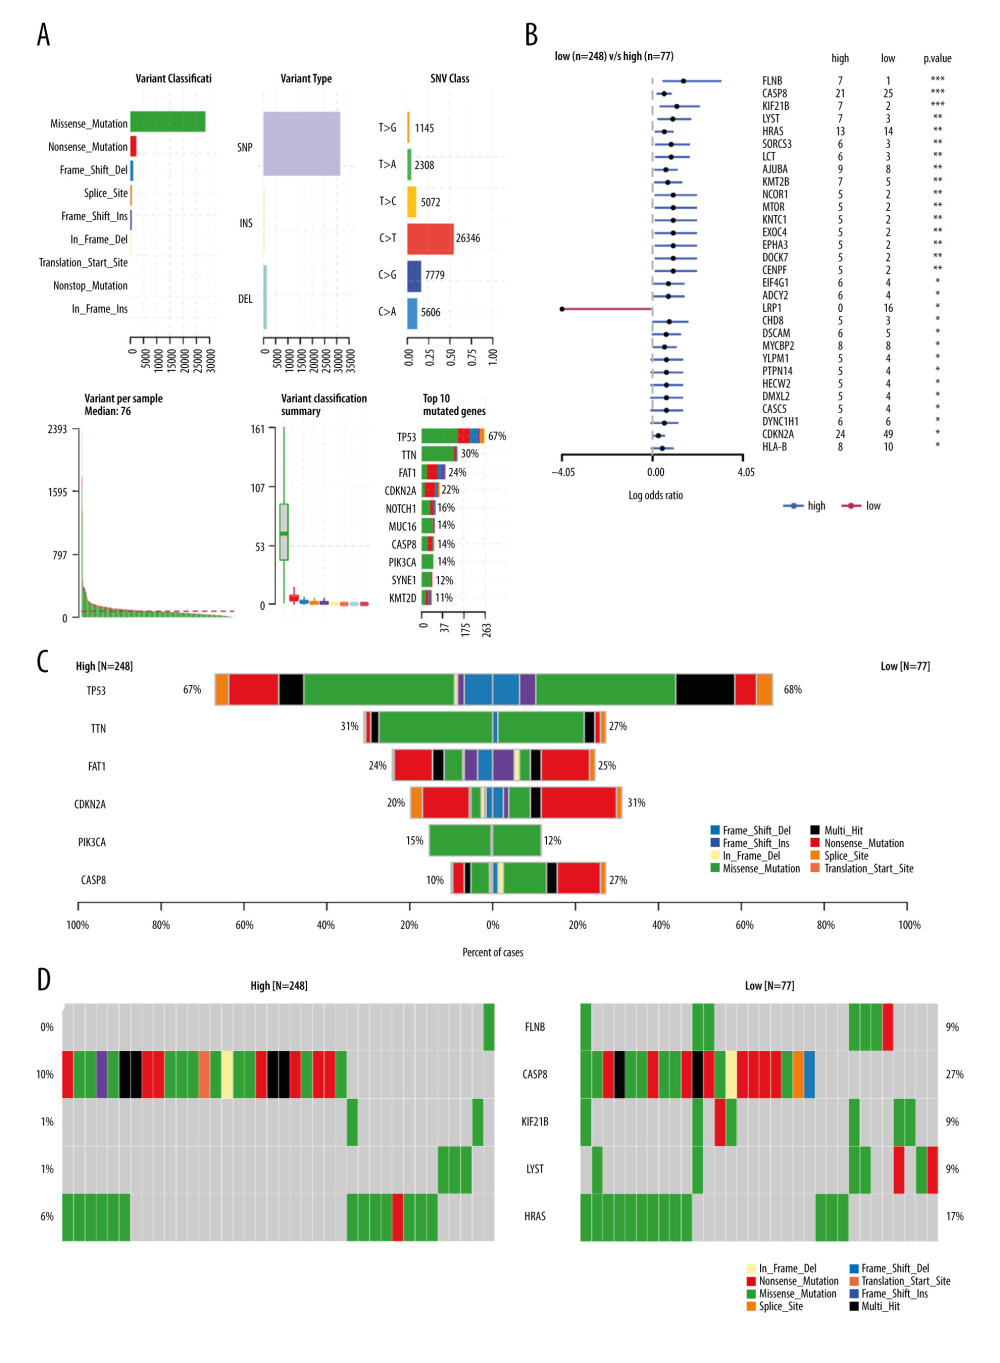 The relationship between MFAP4 and TMB. (A) Overview of mutation data of OSCC tumors in the TCGA database. (B) Group comparison of the first 6 mutant genes. (C) Forest plot of genes that were highly mutated in the high MFAP4 expression group compared to the low expression group. (D) Comparison of mutation data of the top 5 mutant genes between the high and low MFAP4 expression groups.